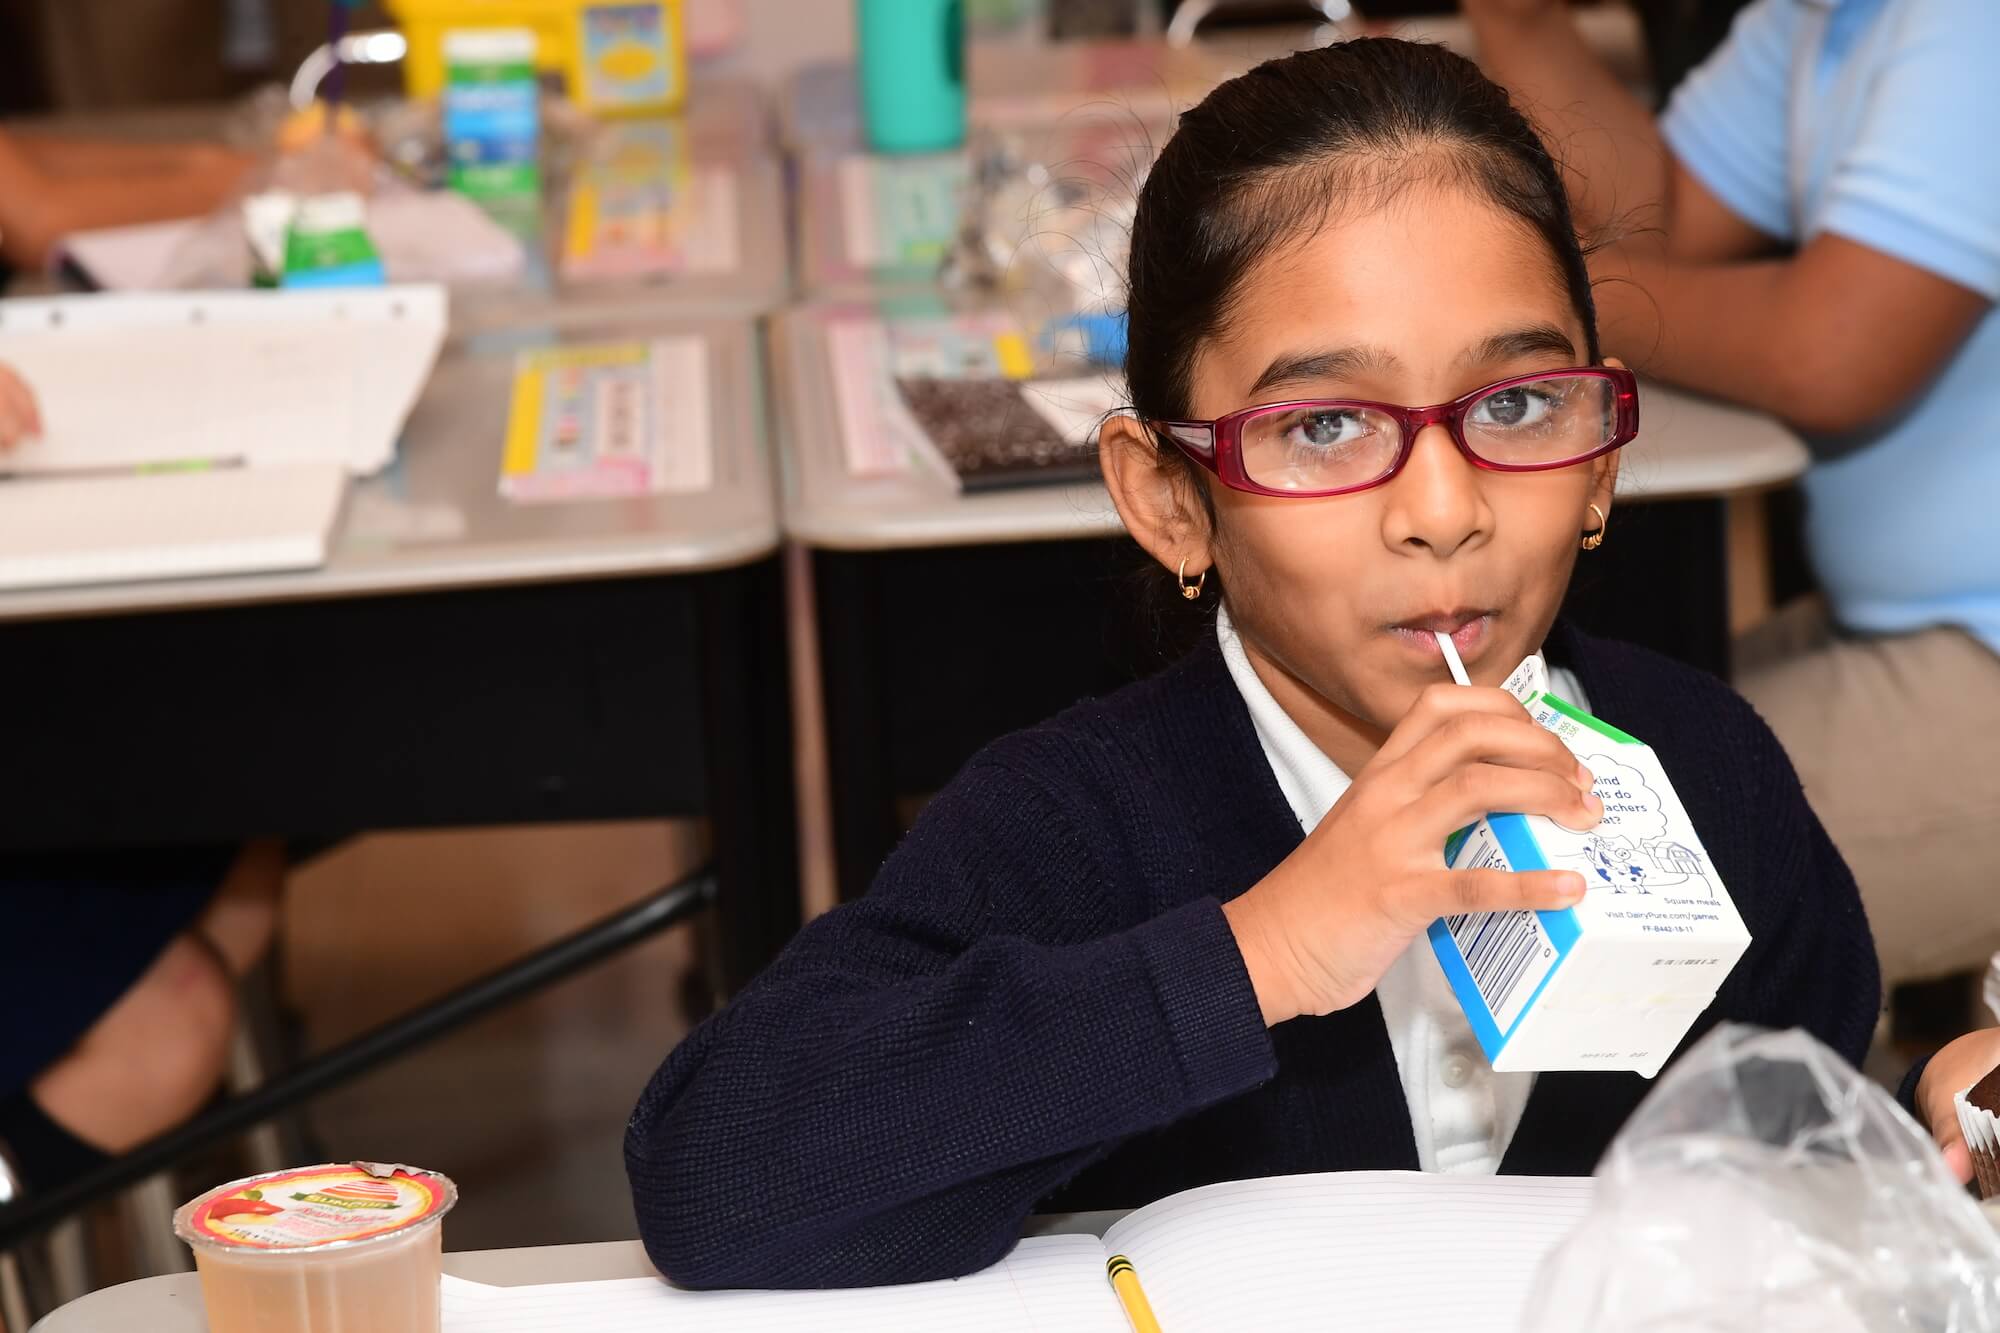 A girl wearing glasses drinks a carton of milk as part of her school lunch.